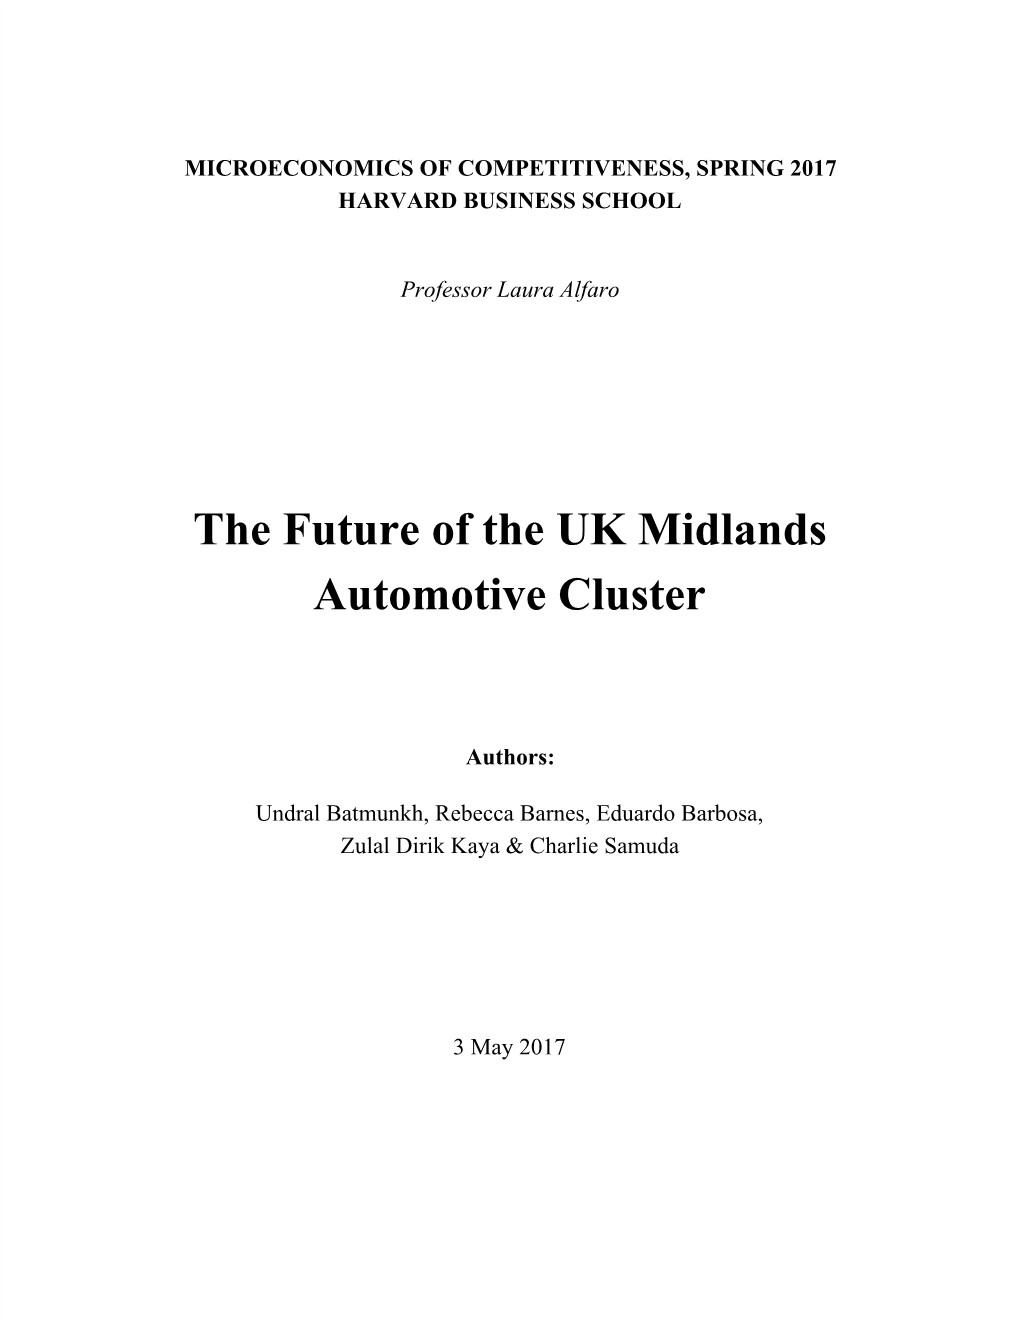 The Future of the UK Midlands Automotive Cluster (Pdf)